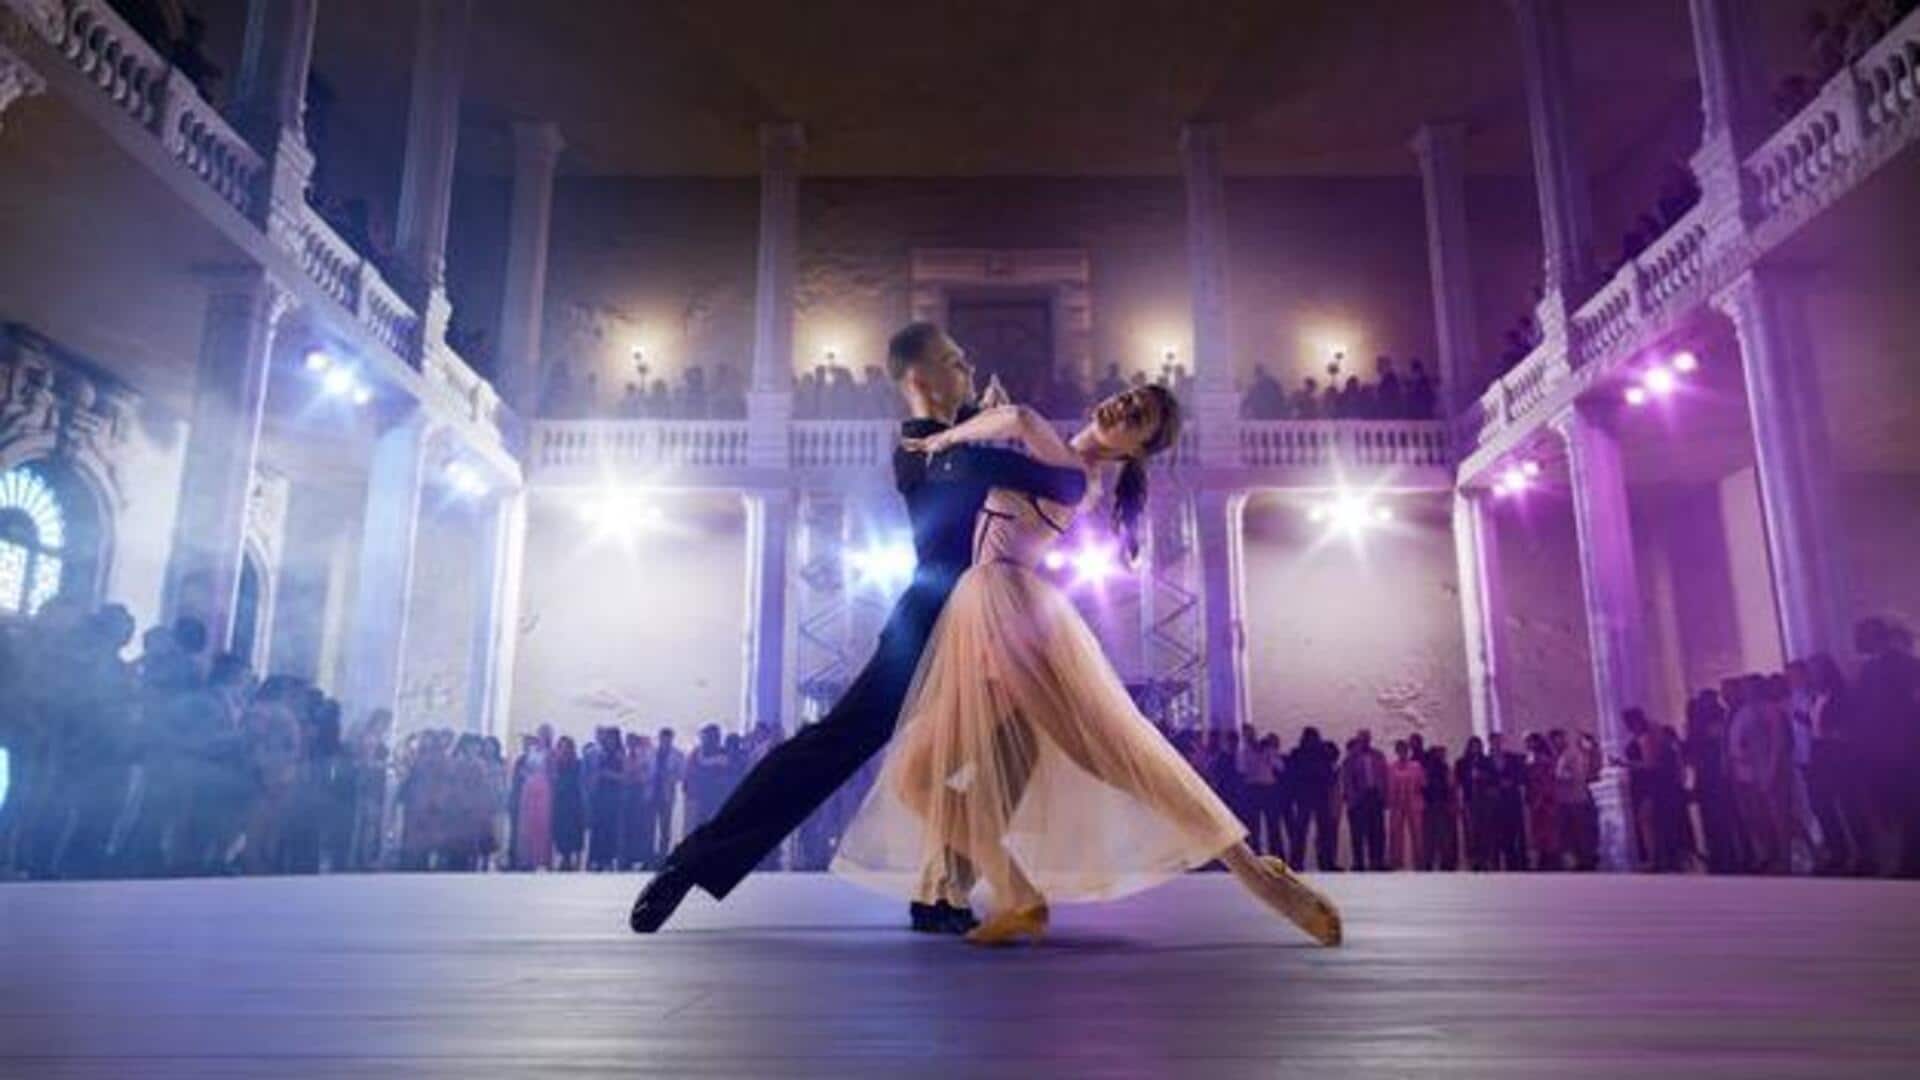 Delve into Vienna's enchanting waltz culture with these recommendations